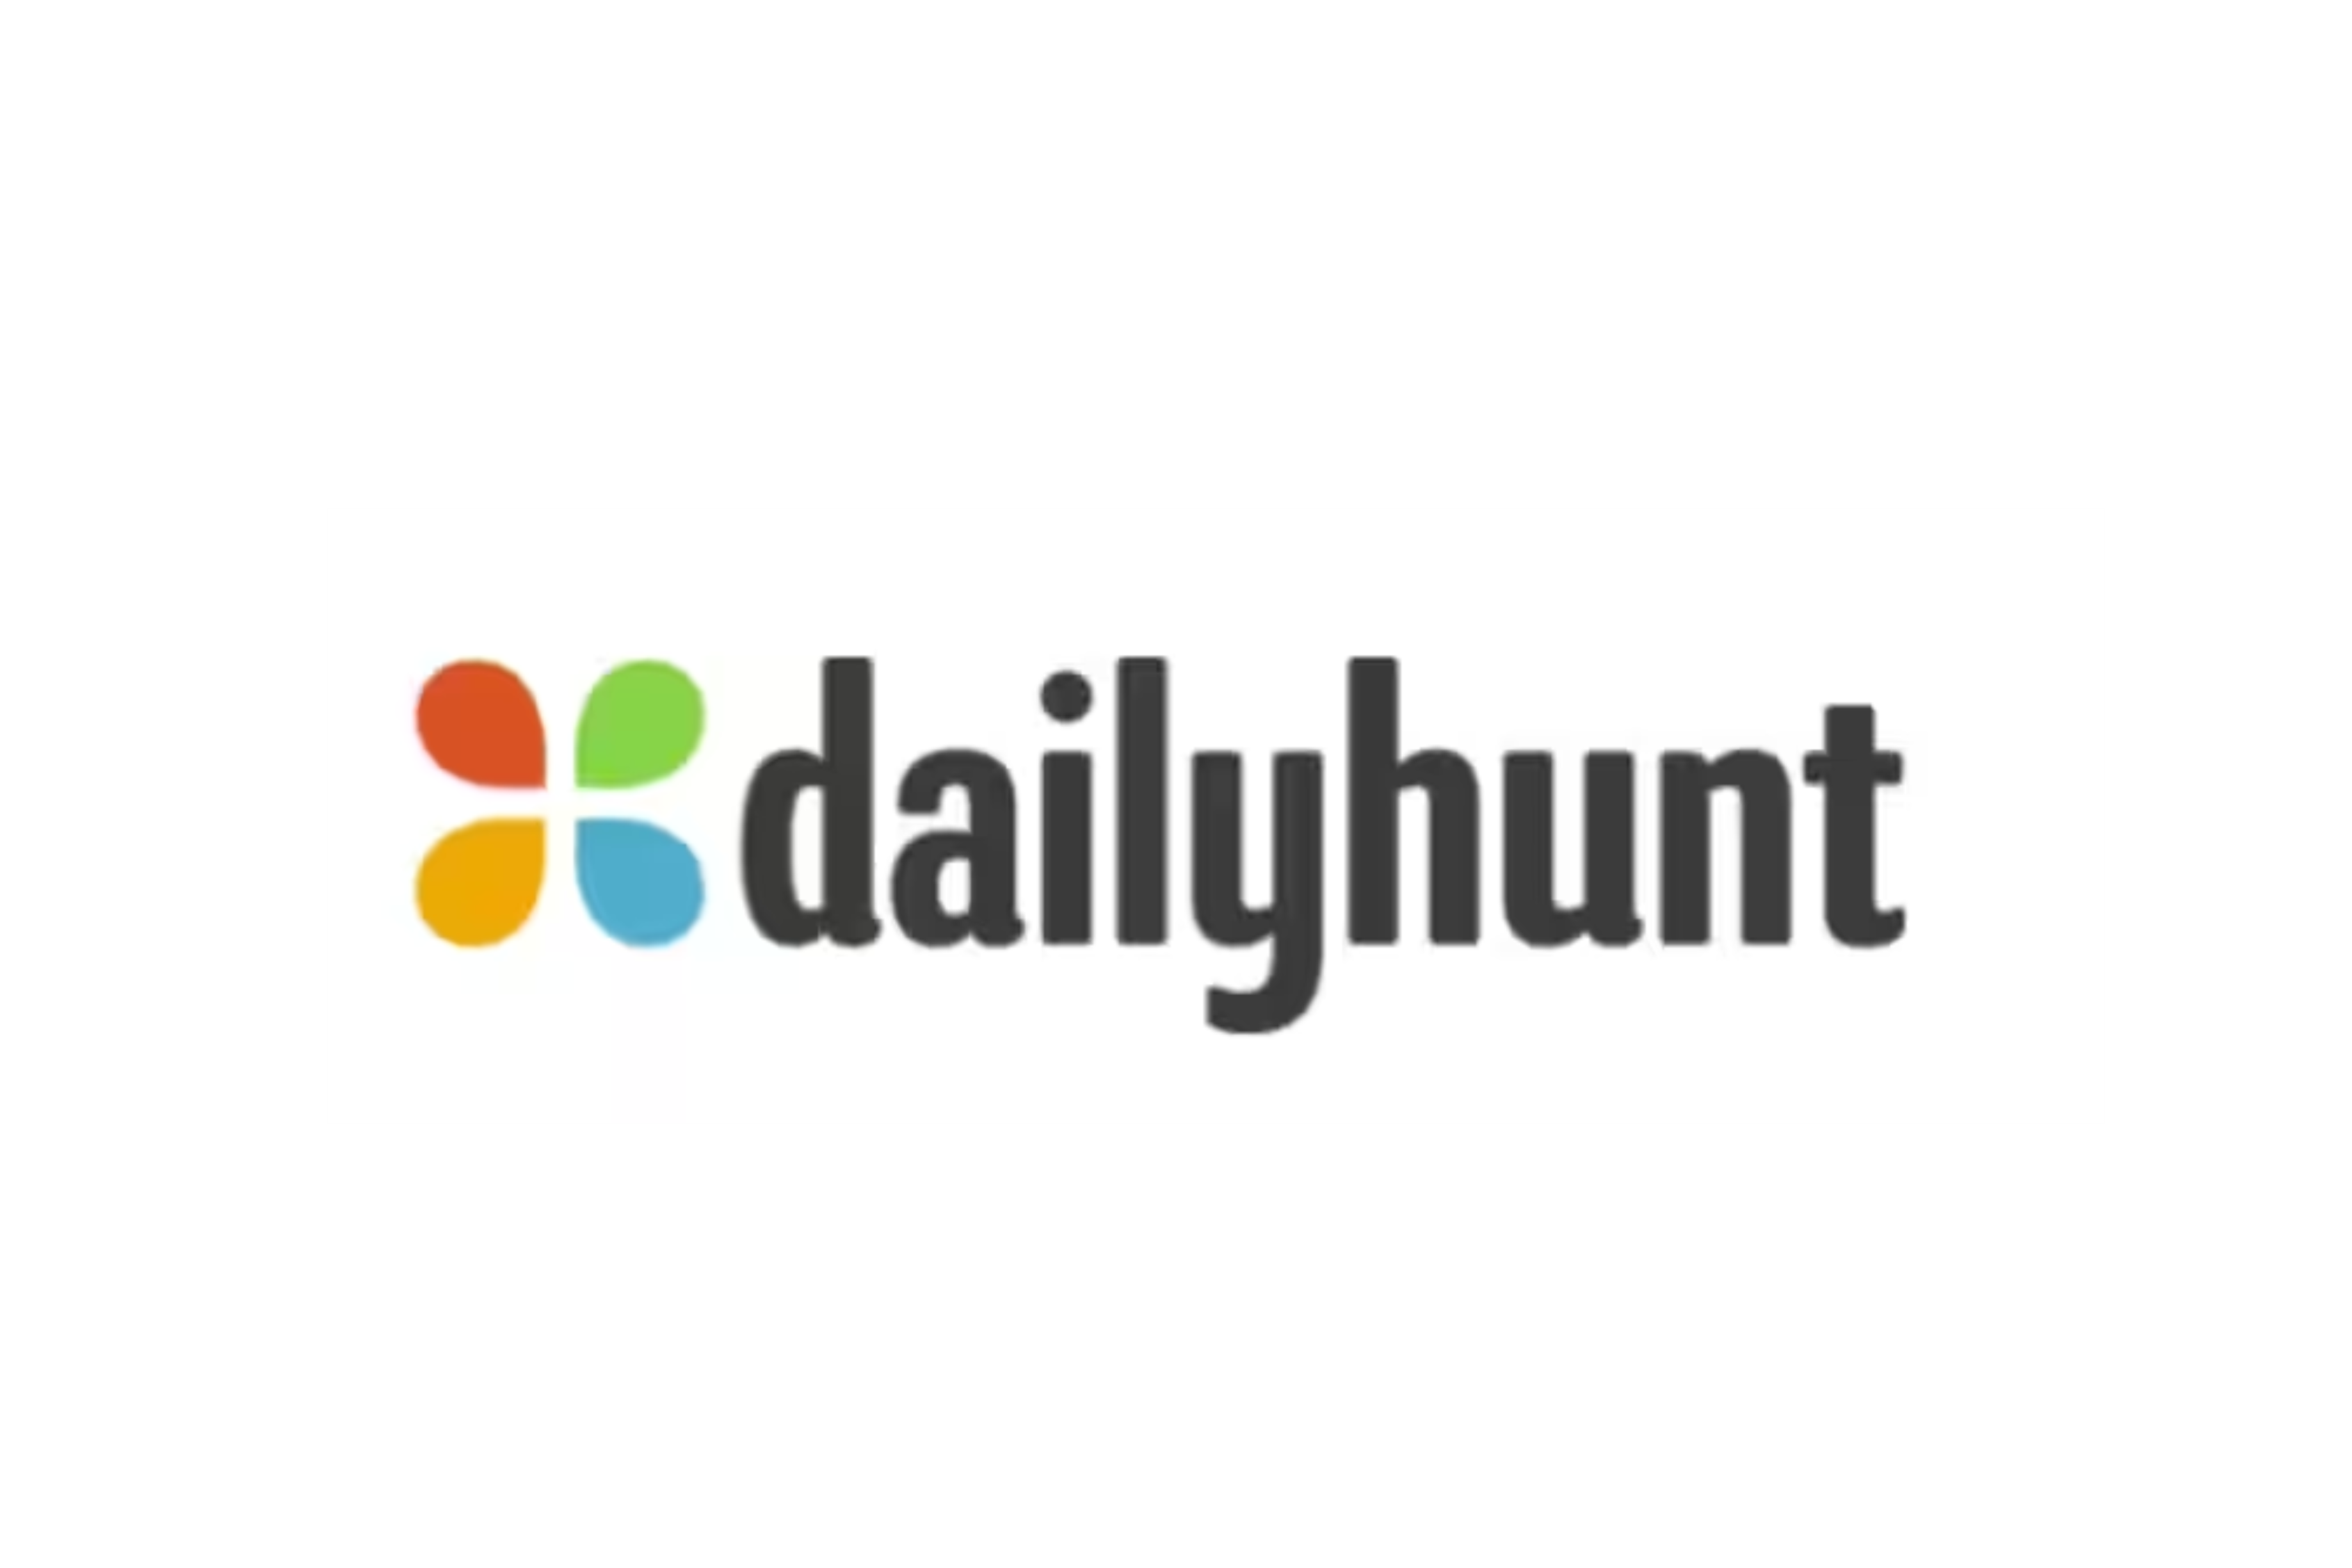 Dailyhunt Royalty-Free Images, Stock Photos & Pictures | Shutterstock